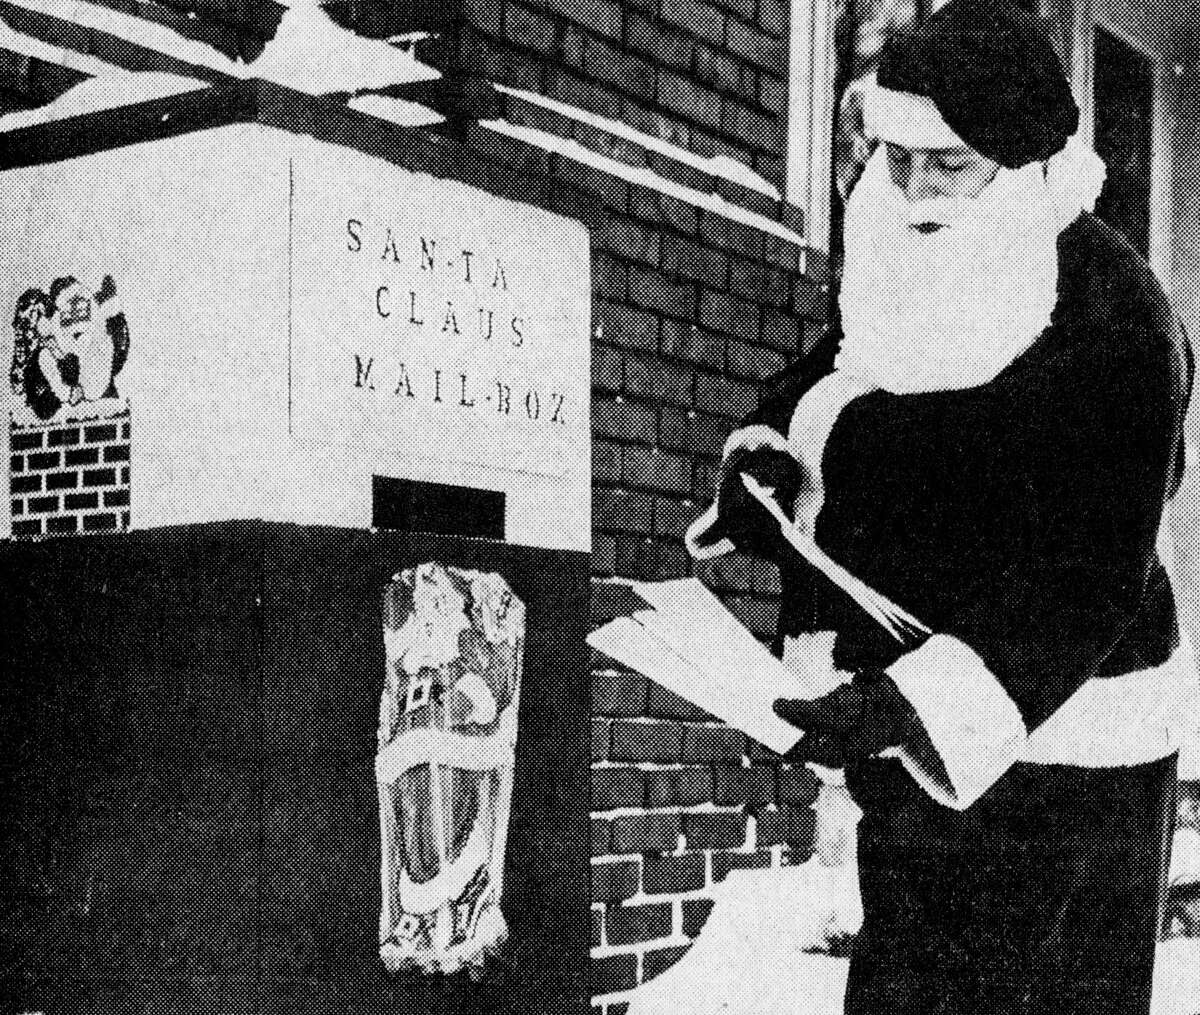 Santa Claus looks at some of the letters deposited in the Manistee Recreation Association Santa Claus mailbox located on Maple Street. Santa Claus will be at the MRA from 10 to 11:30 a.m. and from 1 to 2:30 p.m., on Monday, Wednesday and Friday. The photo was published in the News Advocate on Dec. 14, 1962.